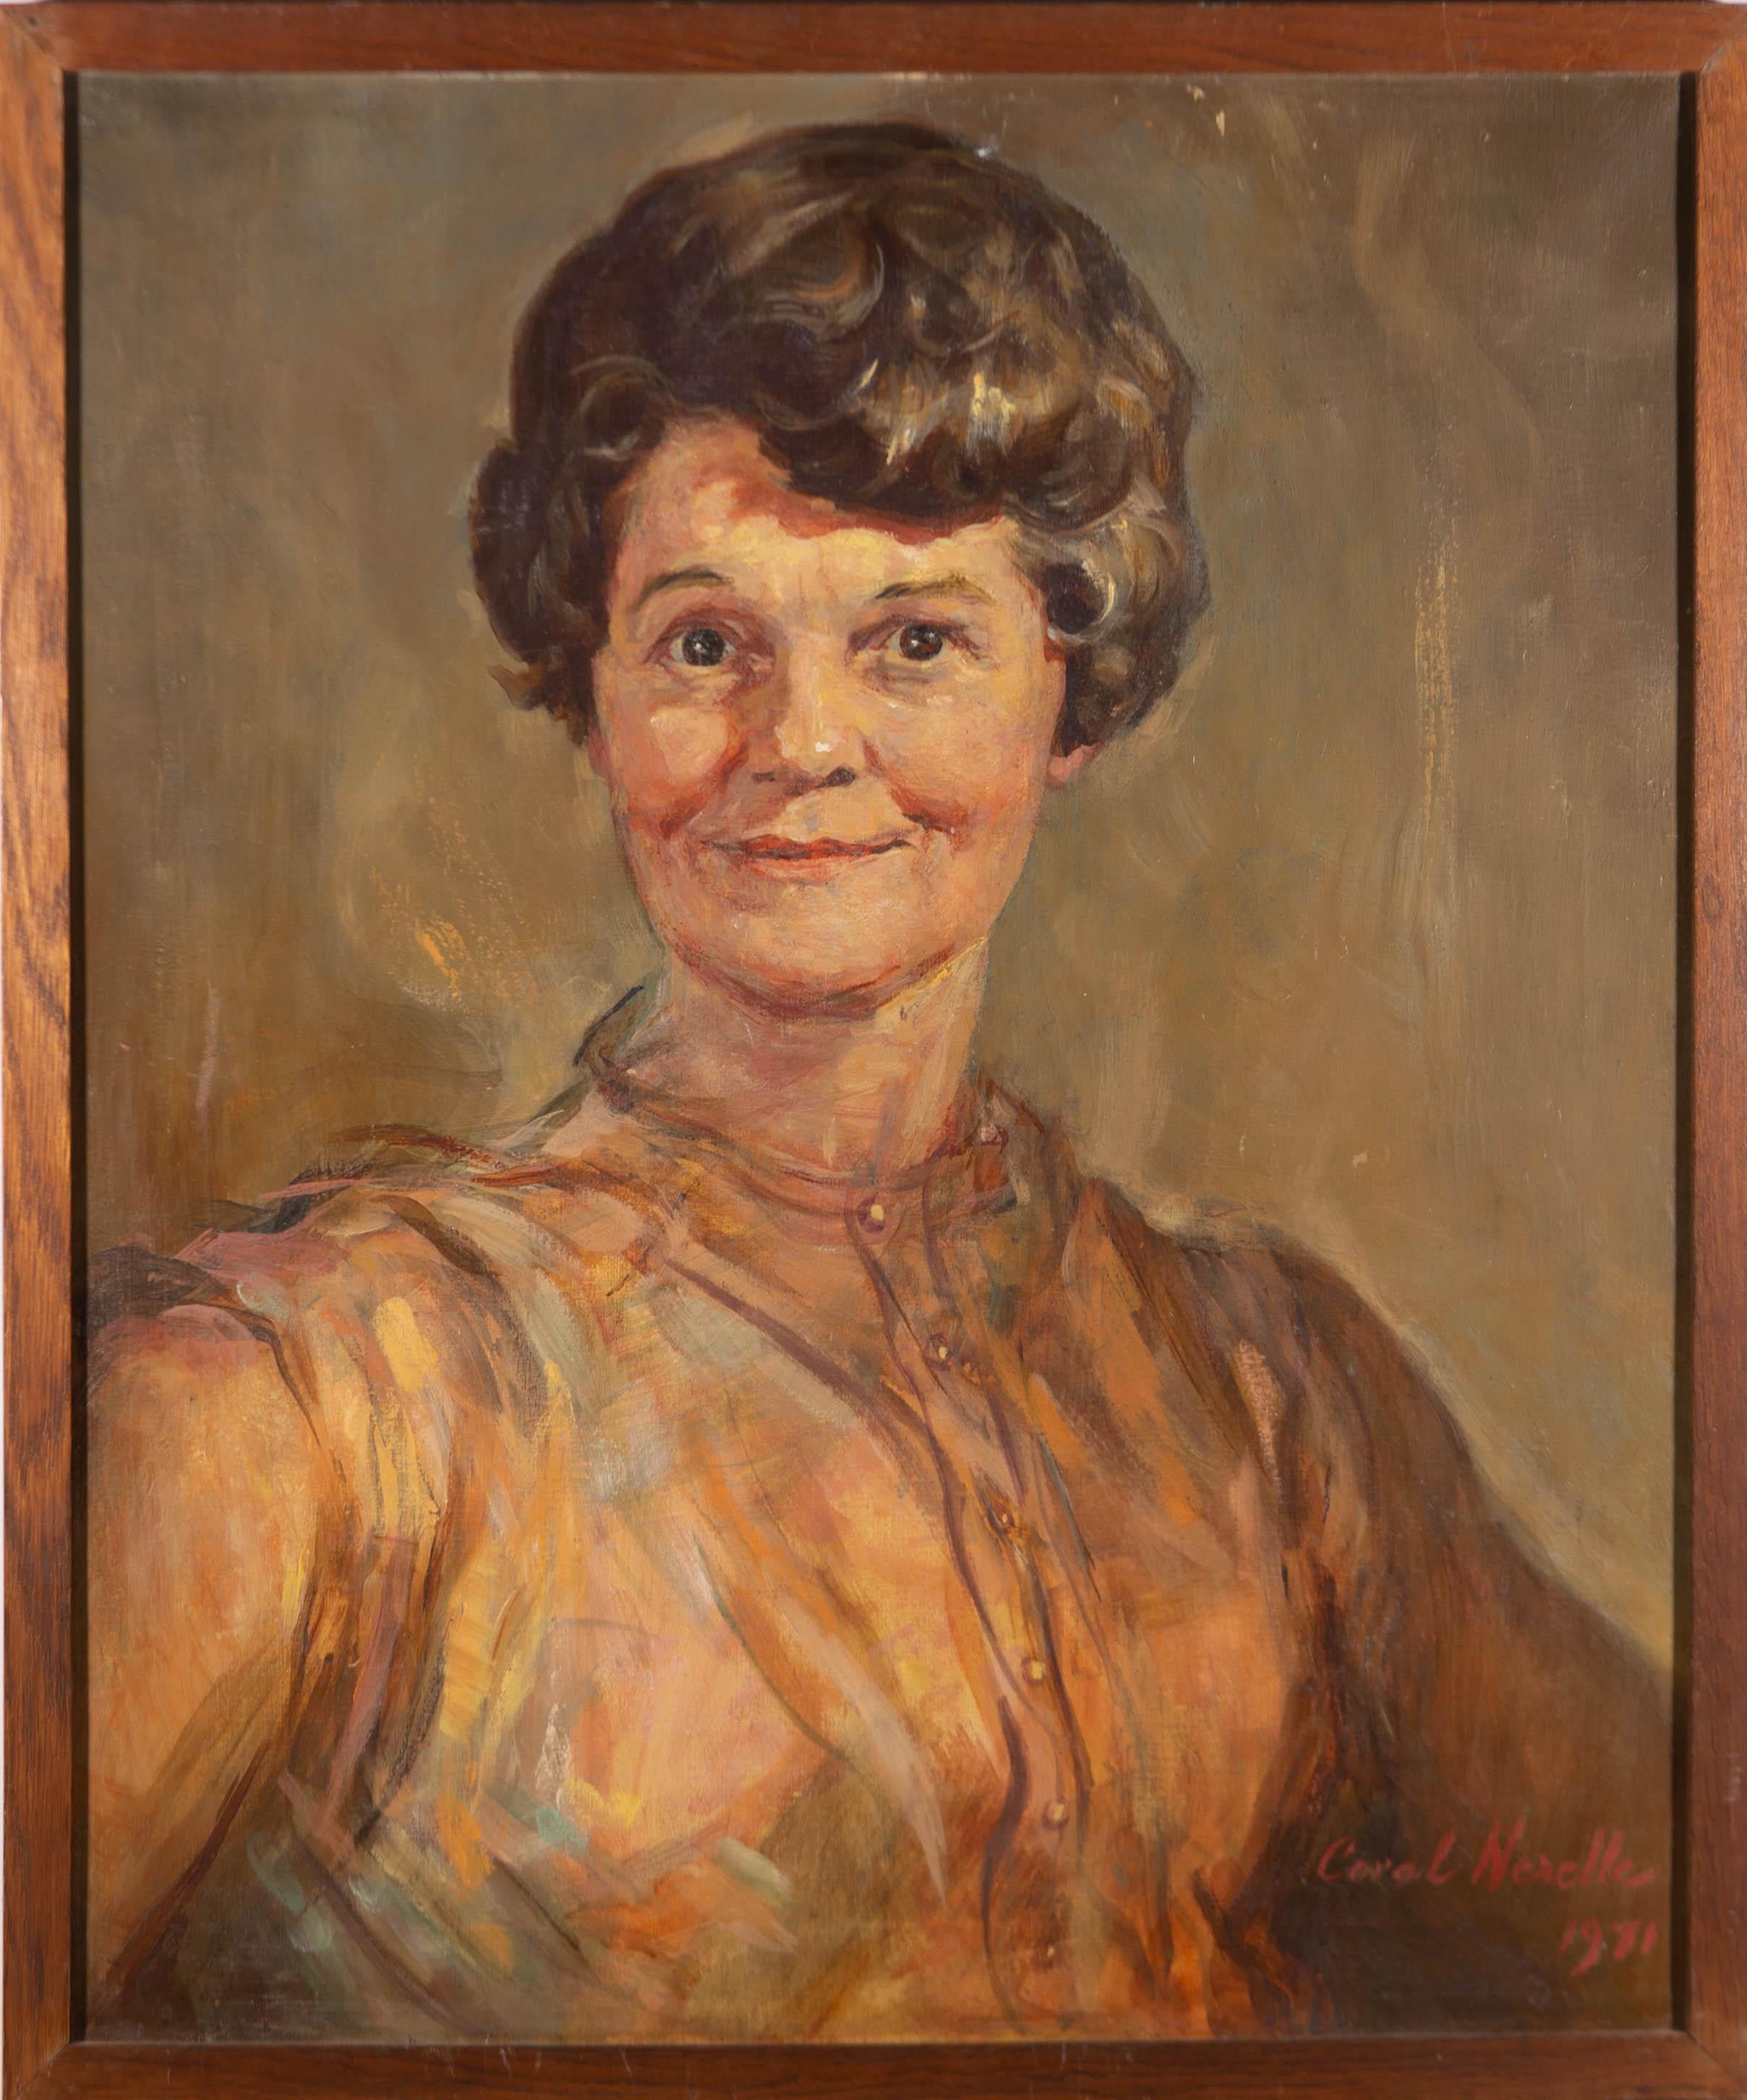 Unknown Portrait Painting - Coral Nerelle RWA (1909-1986) - Framed 1971 Oil, Portrait of a Woman